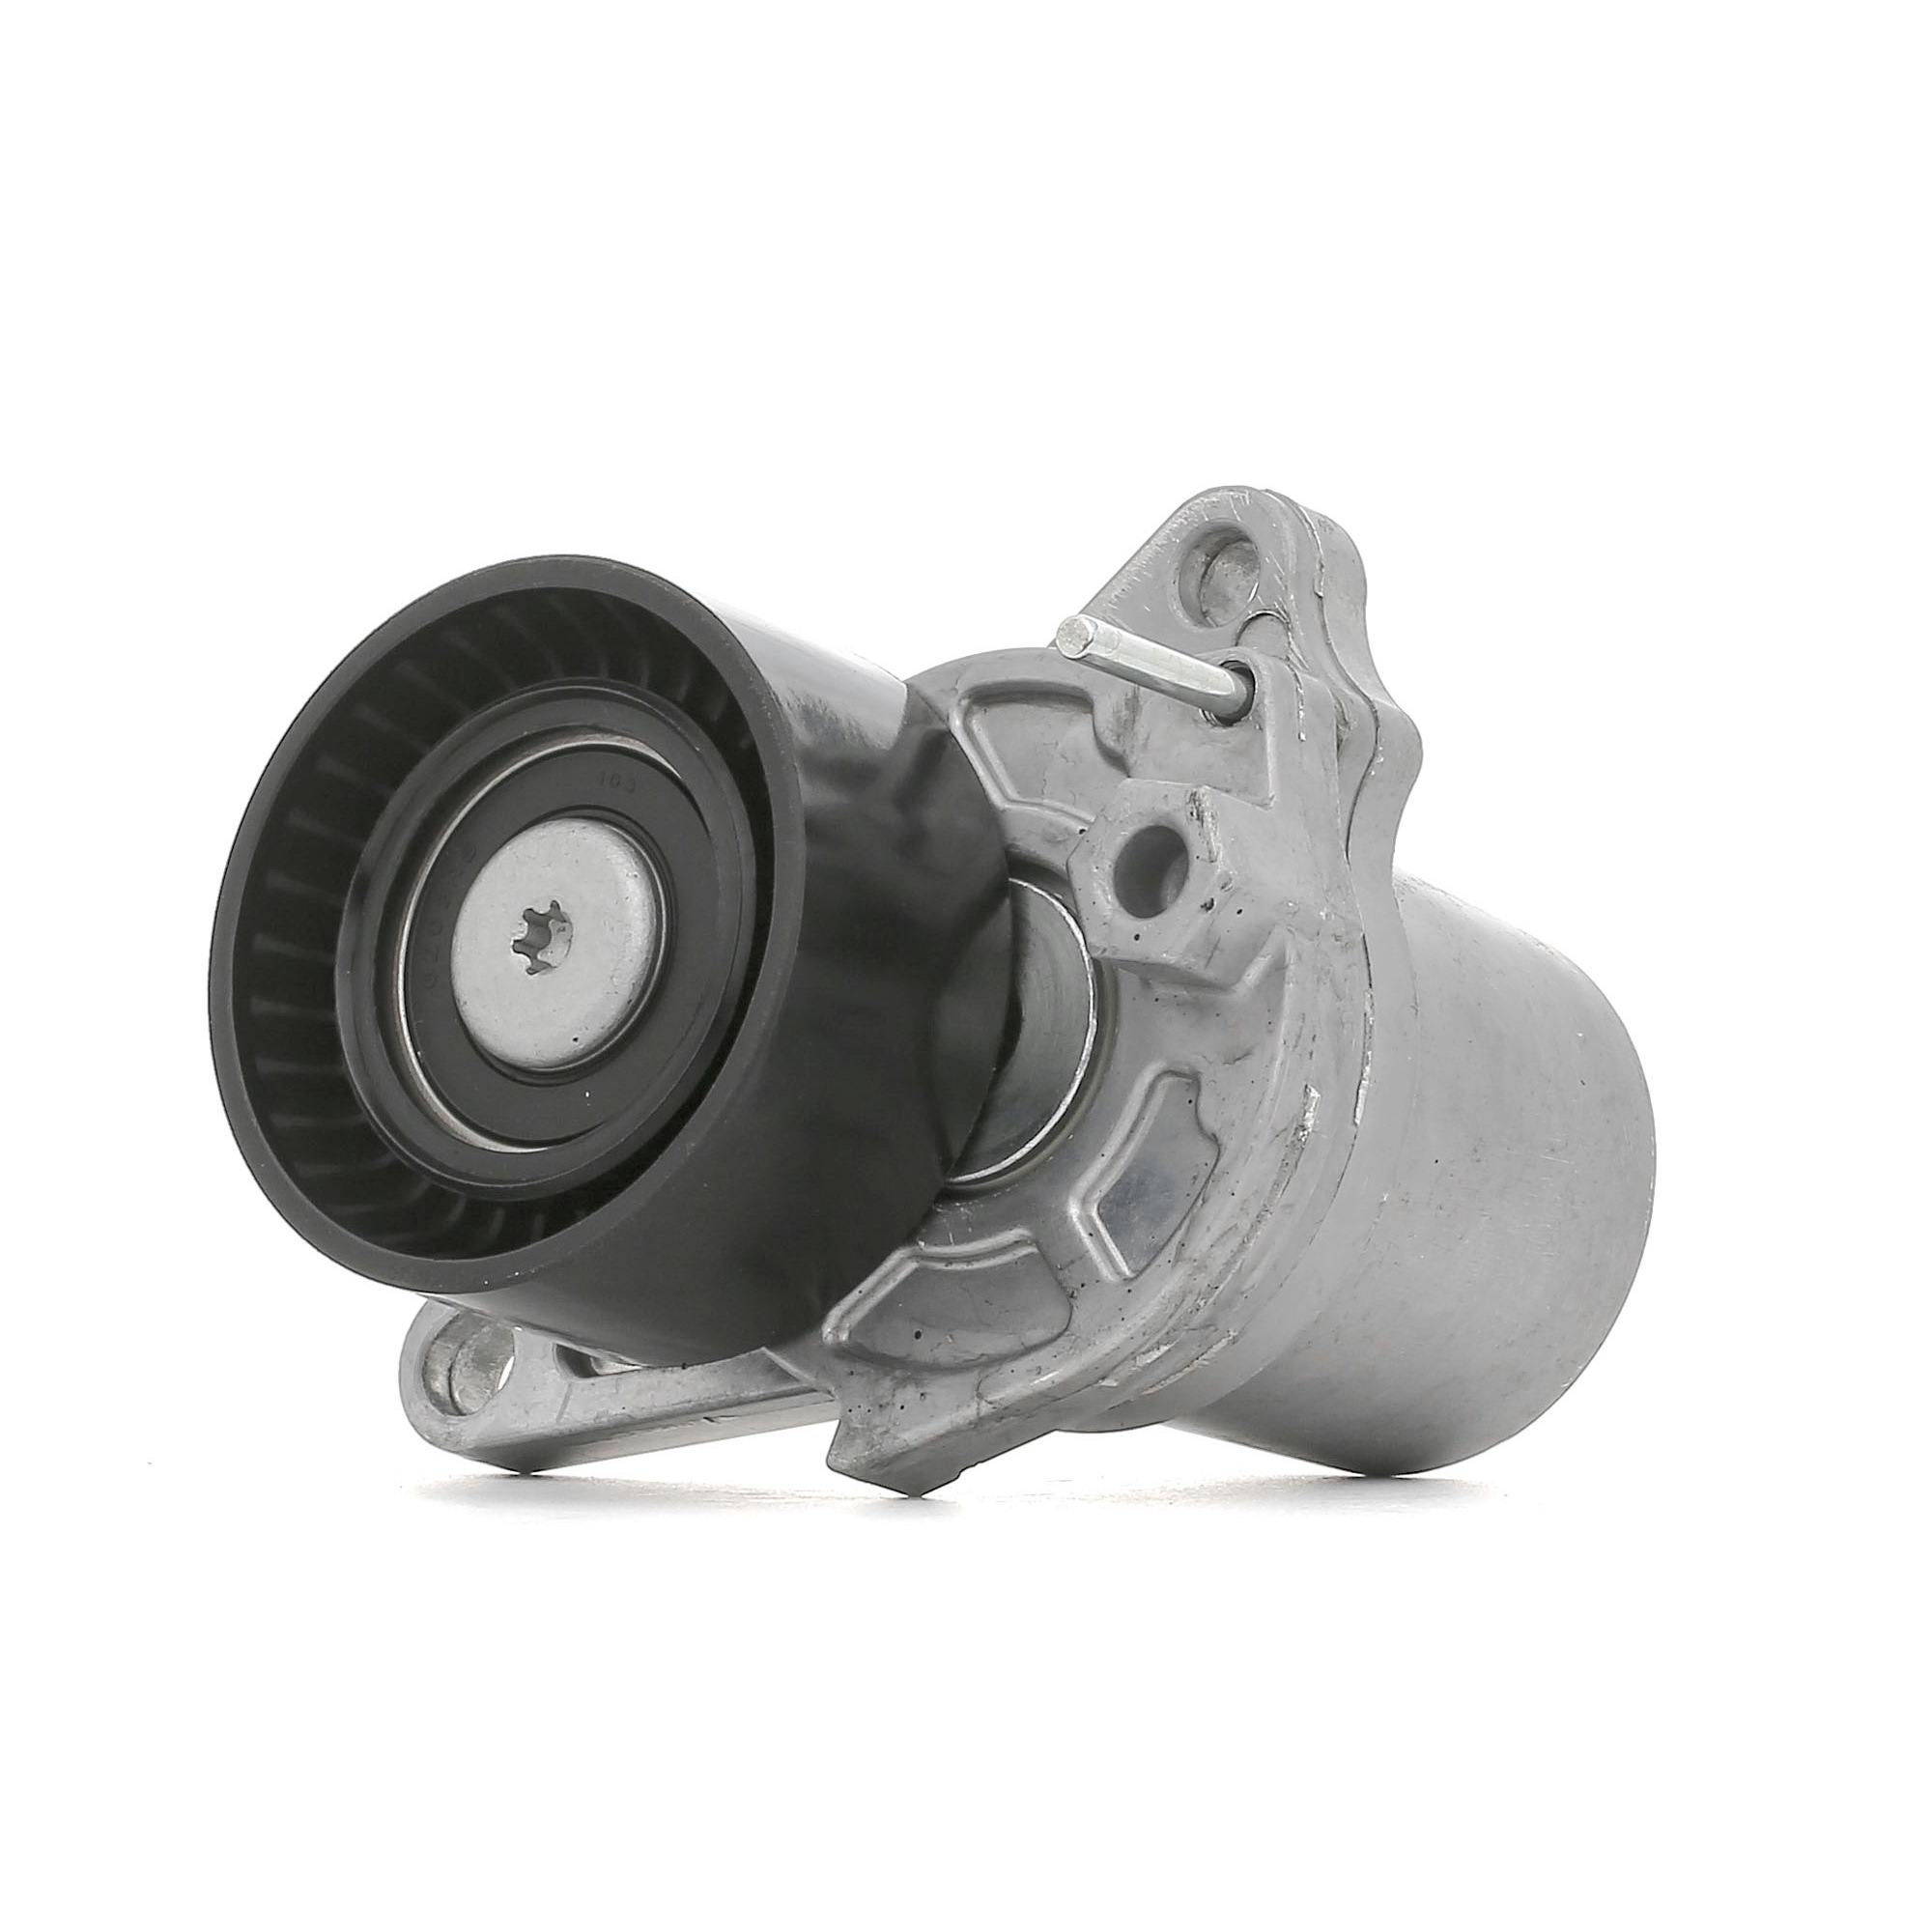 Buy Tensioner pulley RIDEX 310T0302 - Belts, chains, rollers parts RENAULT Megane 4 Grandtour online